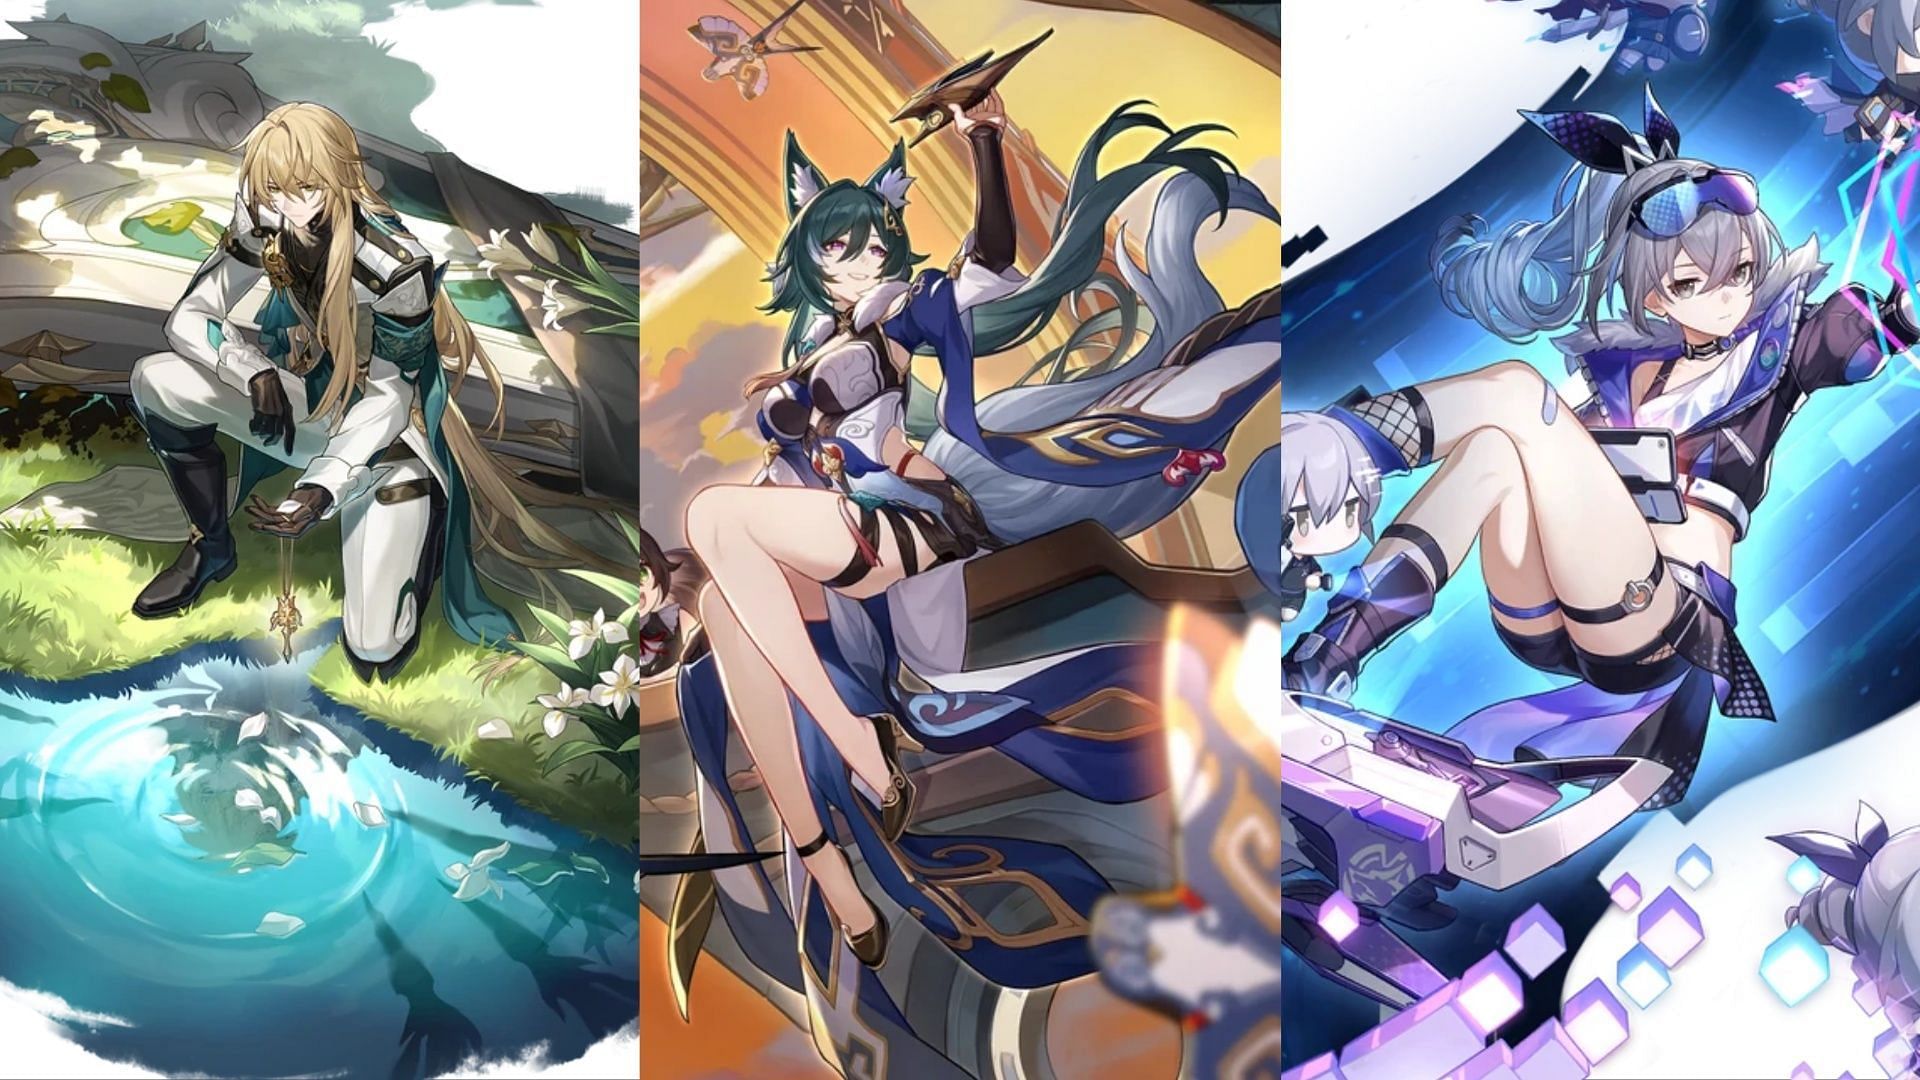 The three featured characters in version 1.1 of Honkai Star Rail (Image via HoYoverse)